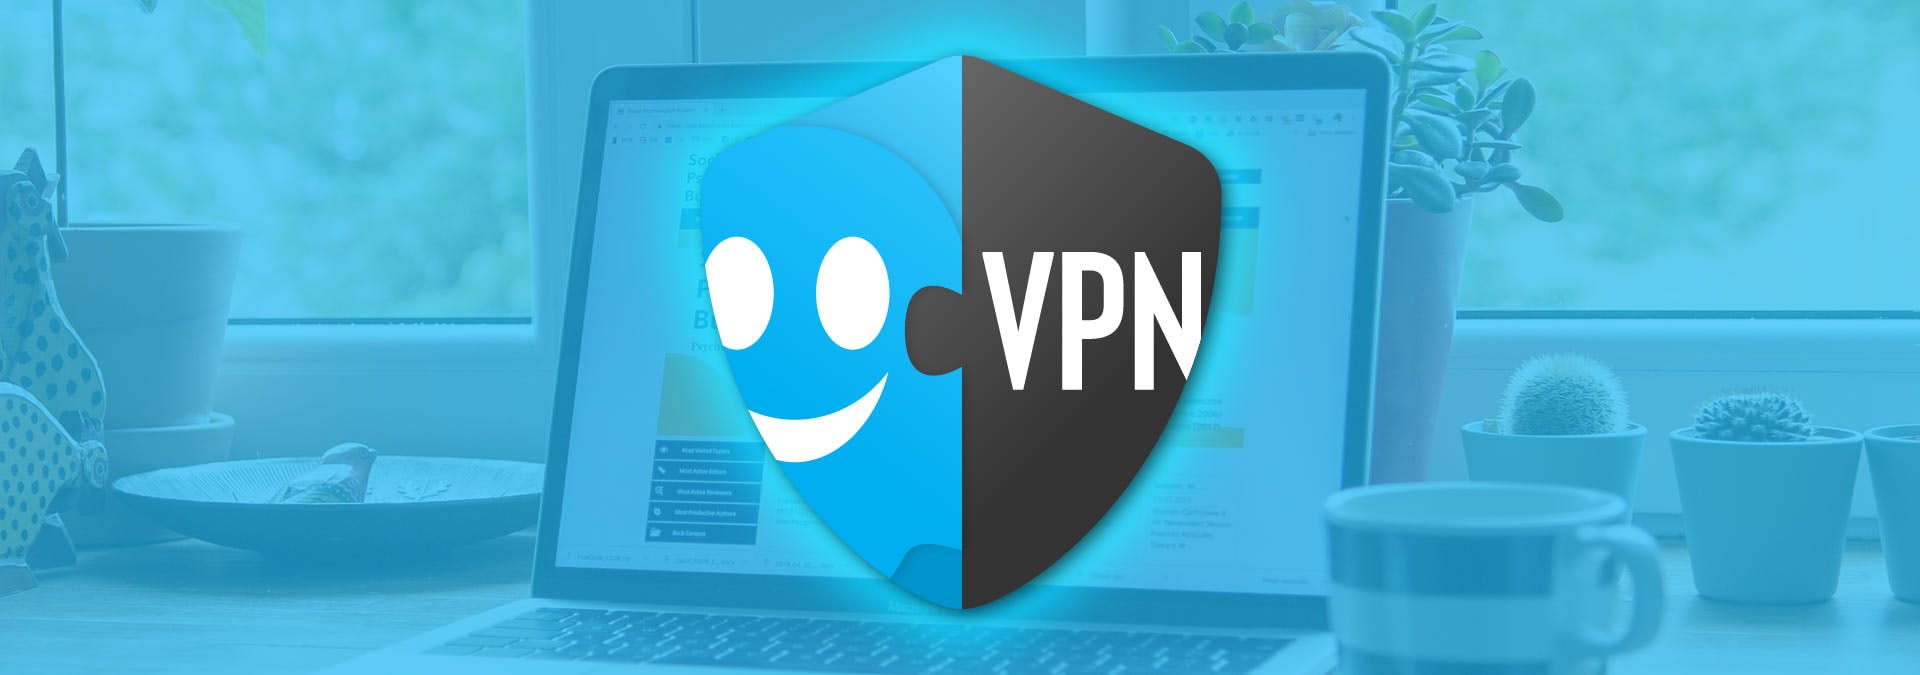 Ghostery and VPNs - The Privacy Duo Explained